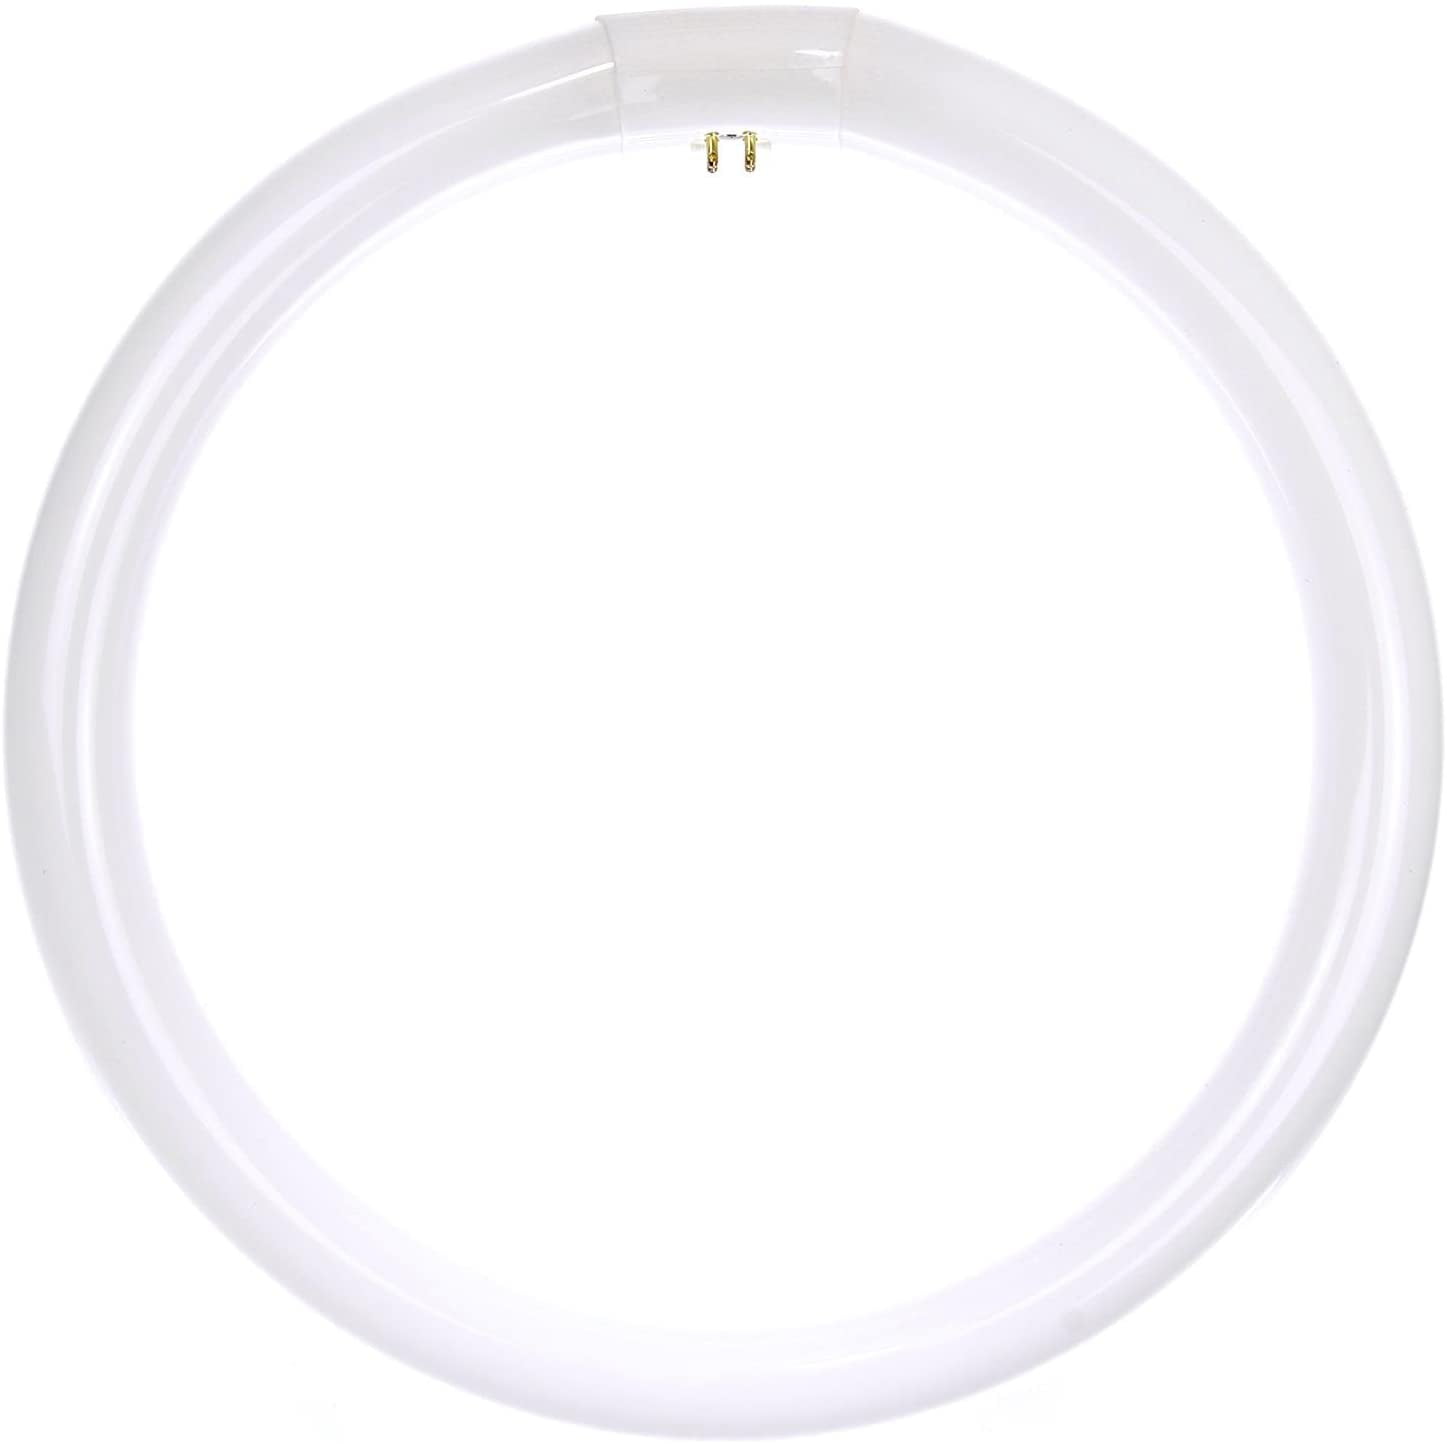 Sylvania FC16T9/CW/RS 16" 40W Cool White 4-Pin Circline Lamp CL16 